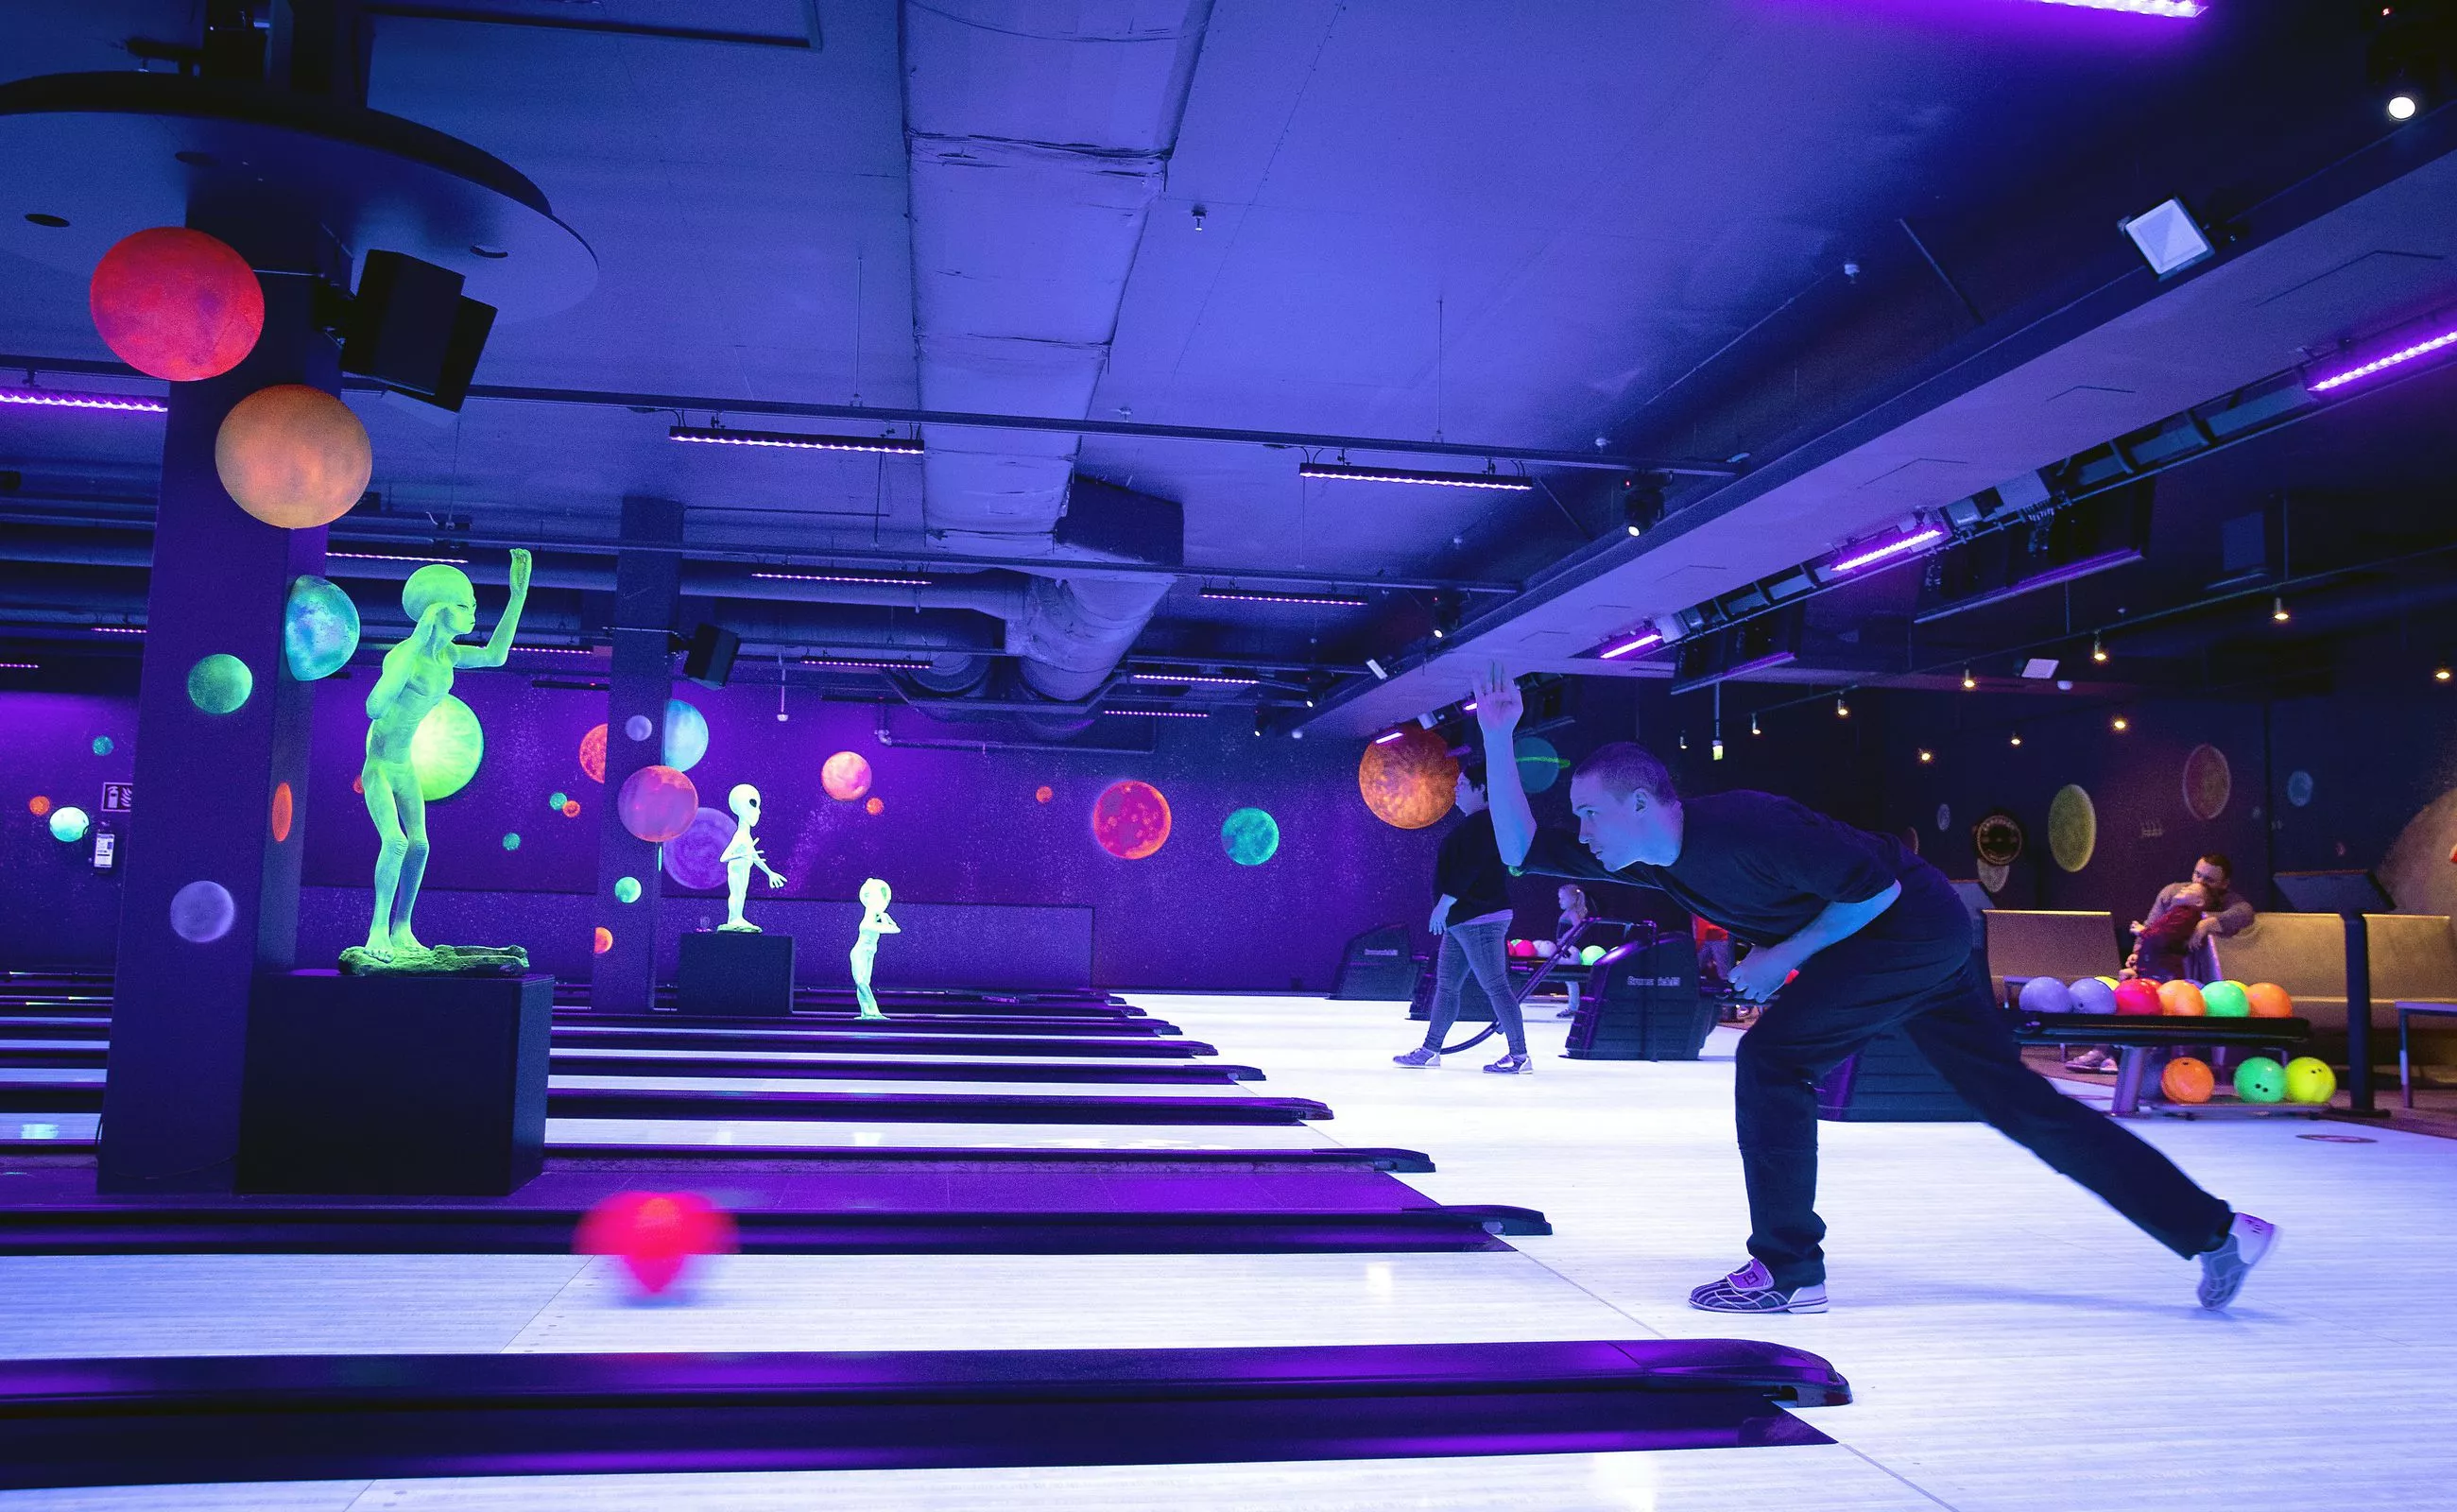 Space Bowling & Billiards in Finland, Europe | Bowling,Billiards - Rated 3.6